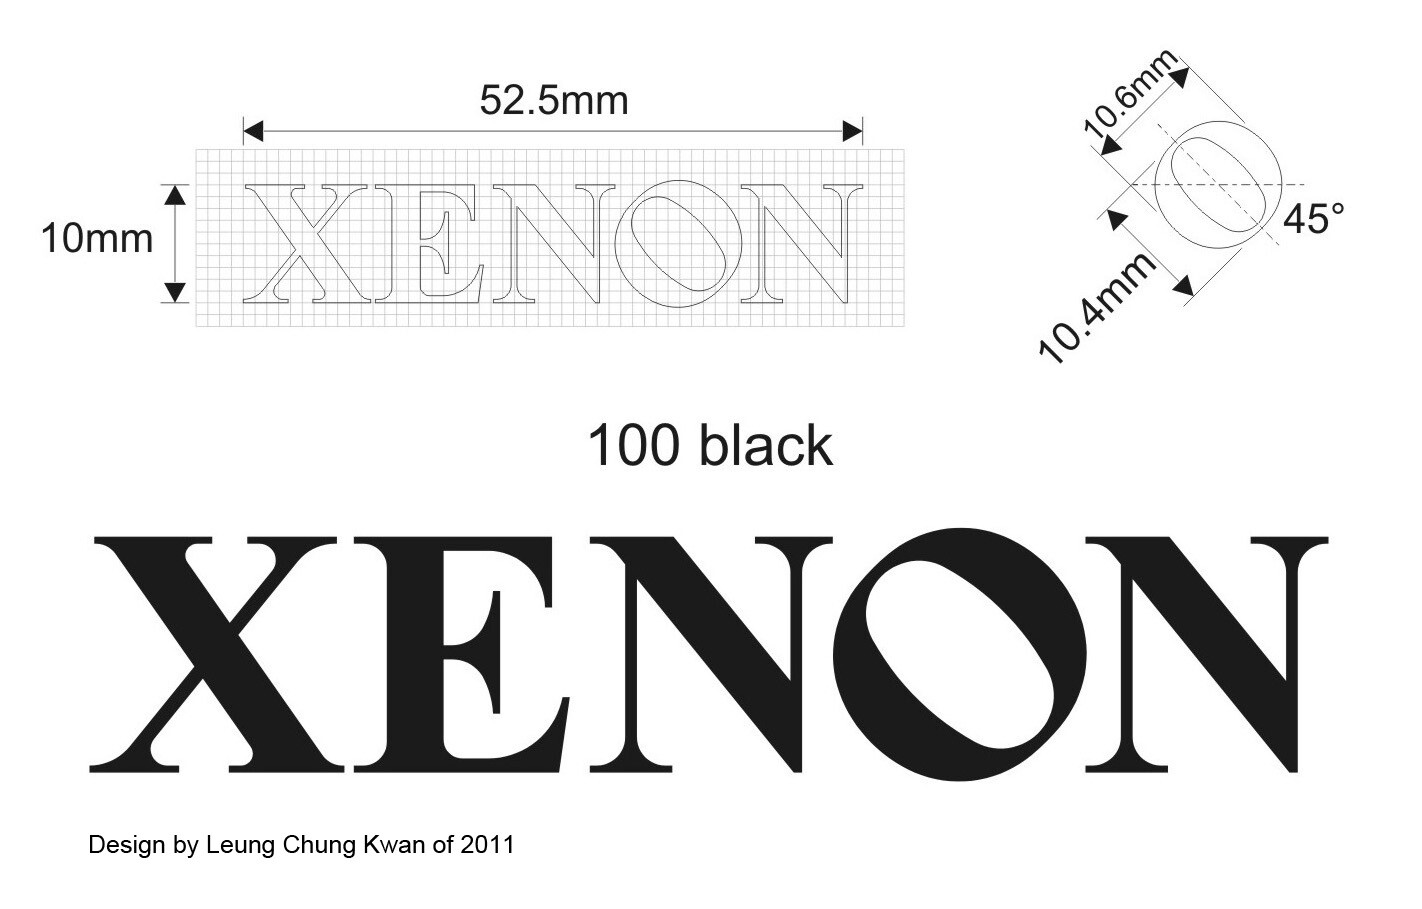 💎 Logo | Design by Leung Chung Kwan on 2011 💎
Brand Name︰xenon | Client︰OTIC Limited